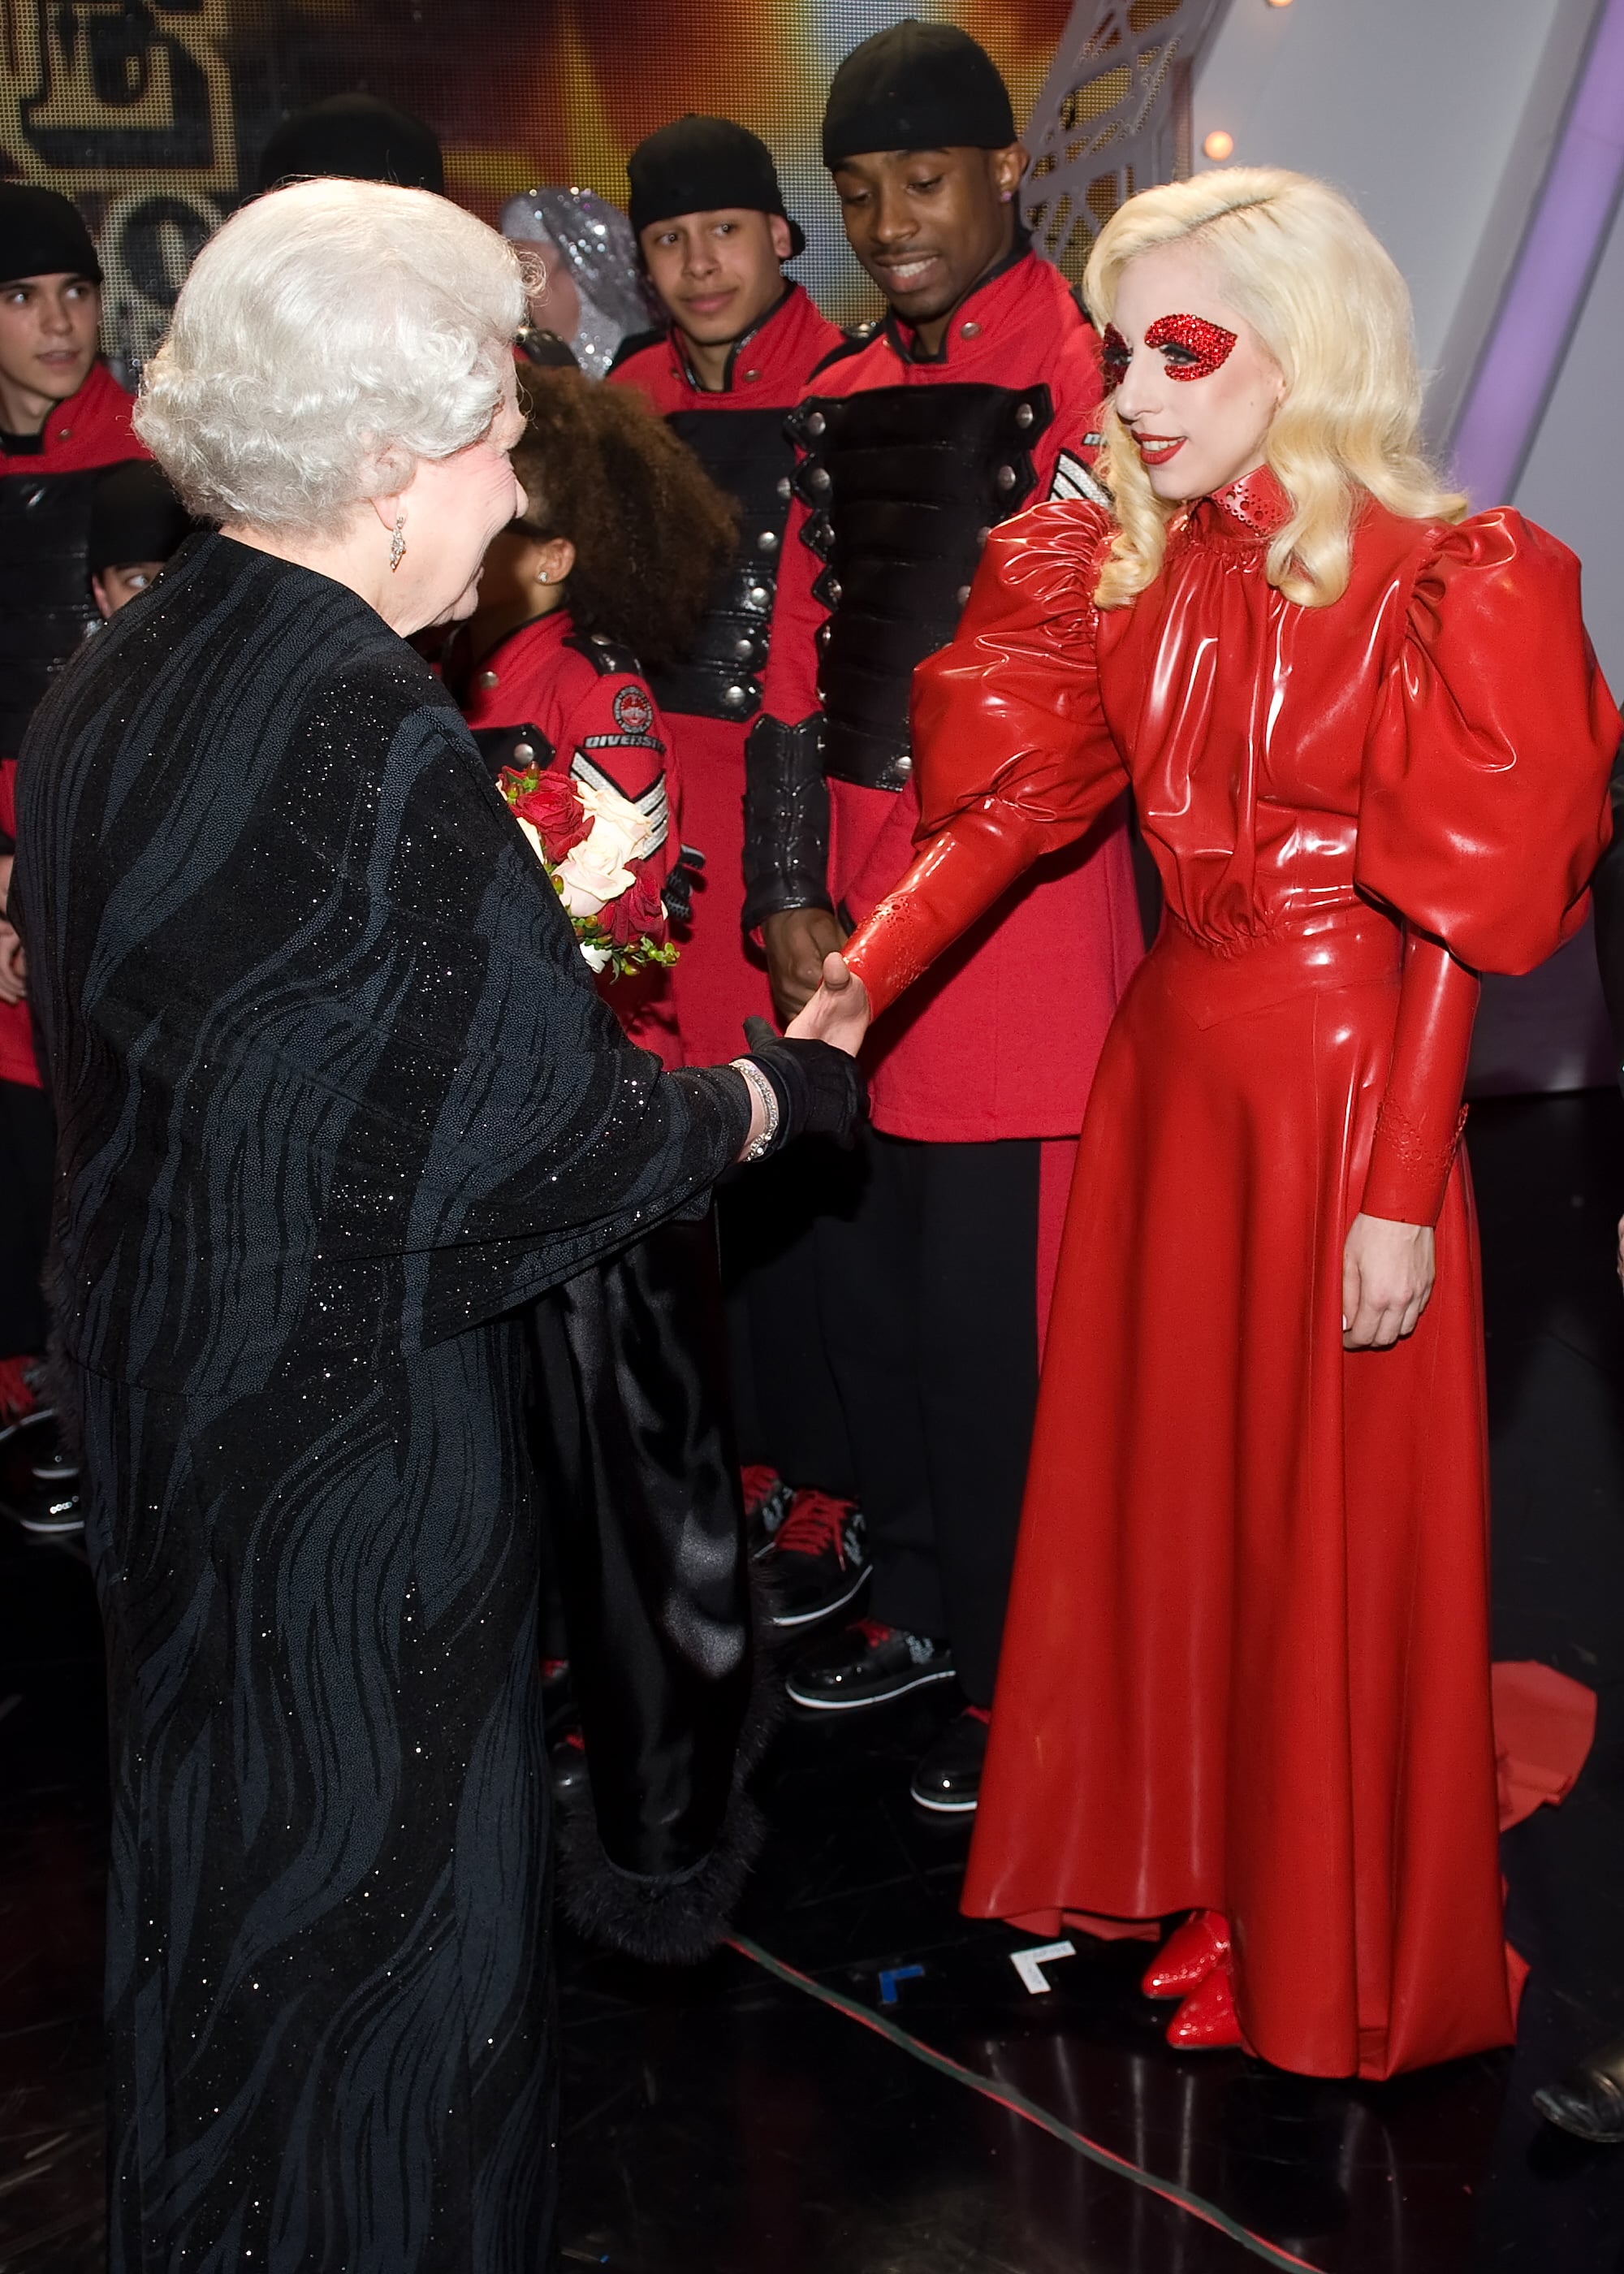 Lady Gaga Red Latex Dress in 2009 | Applause, Applause: Lady Gaga's 28 Most Iconic Fashion Moments | Fashion Photo 26